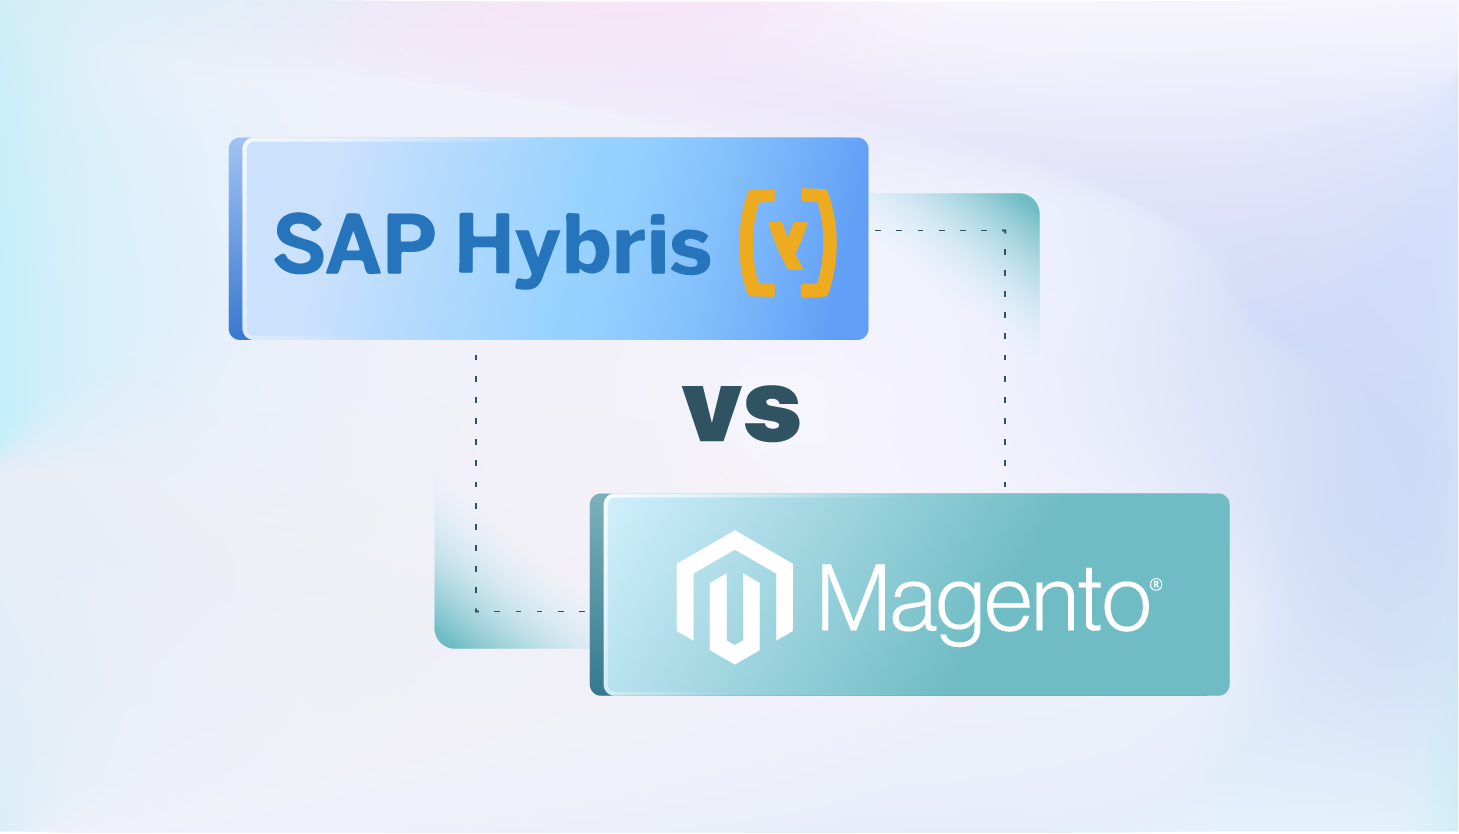 SAP Hybris vs Magento: Which is better?